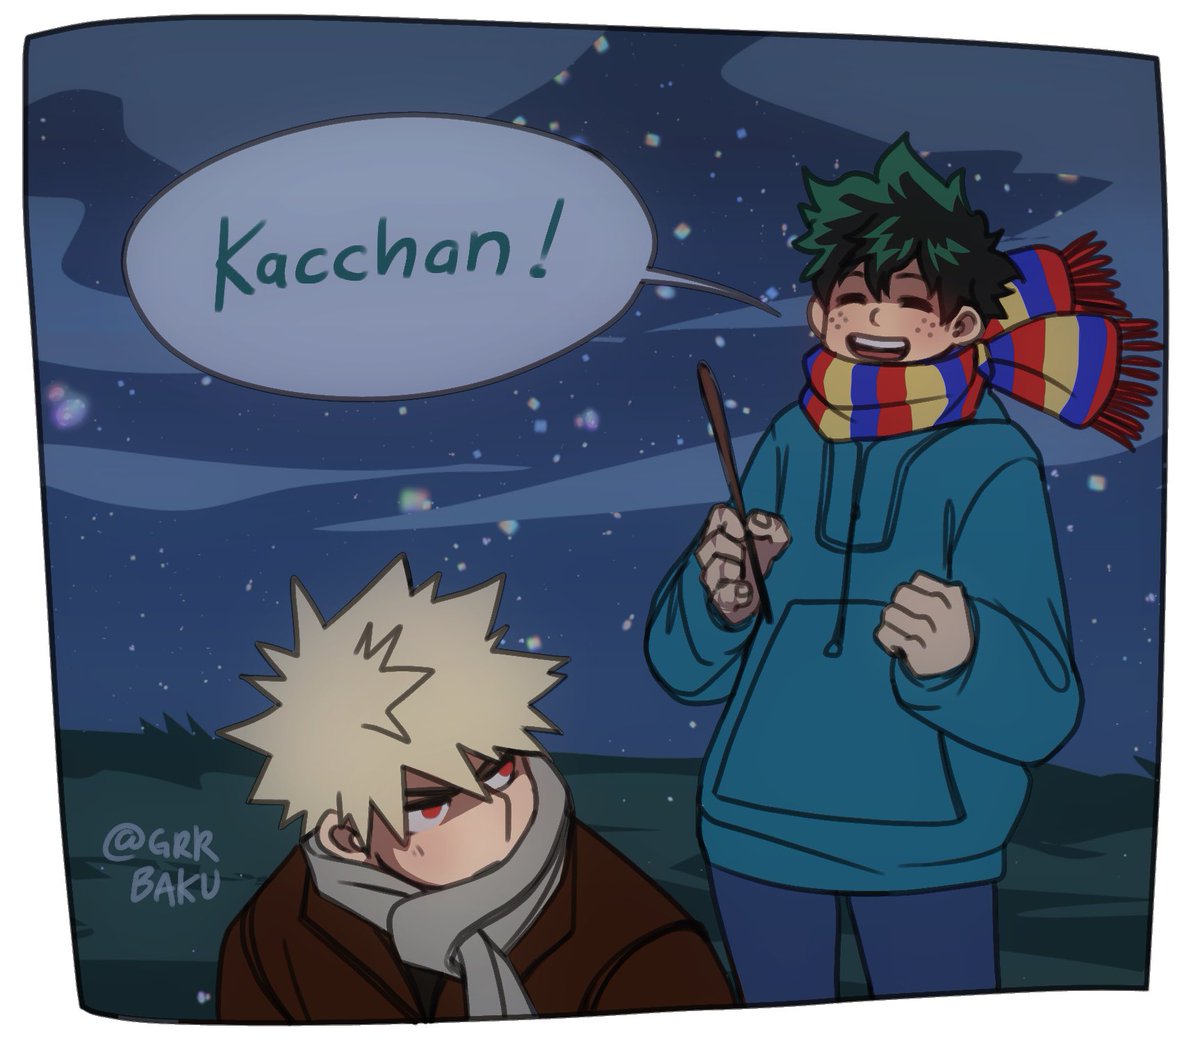 Haha happy new year! And my best wishes to you all! 💥🎉🎊

BkDk having their ways to communicate I guess hahah 
This will have a part 2 >_< 